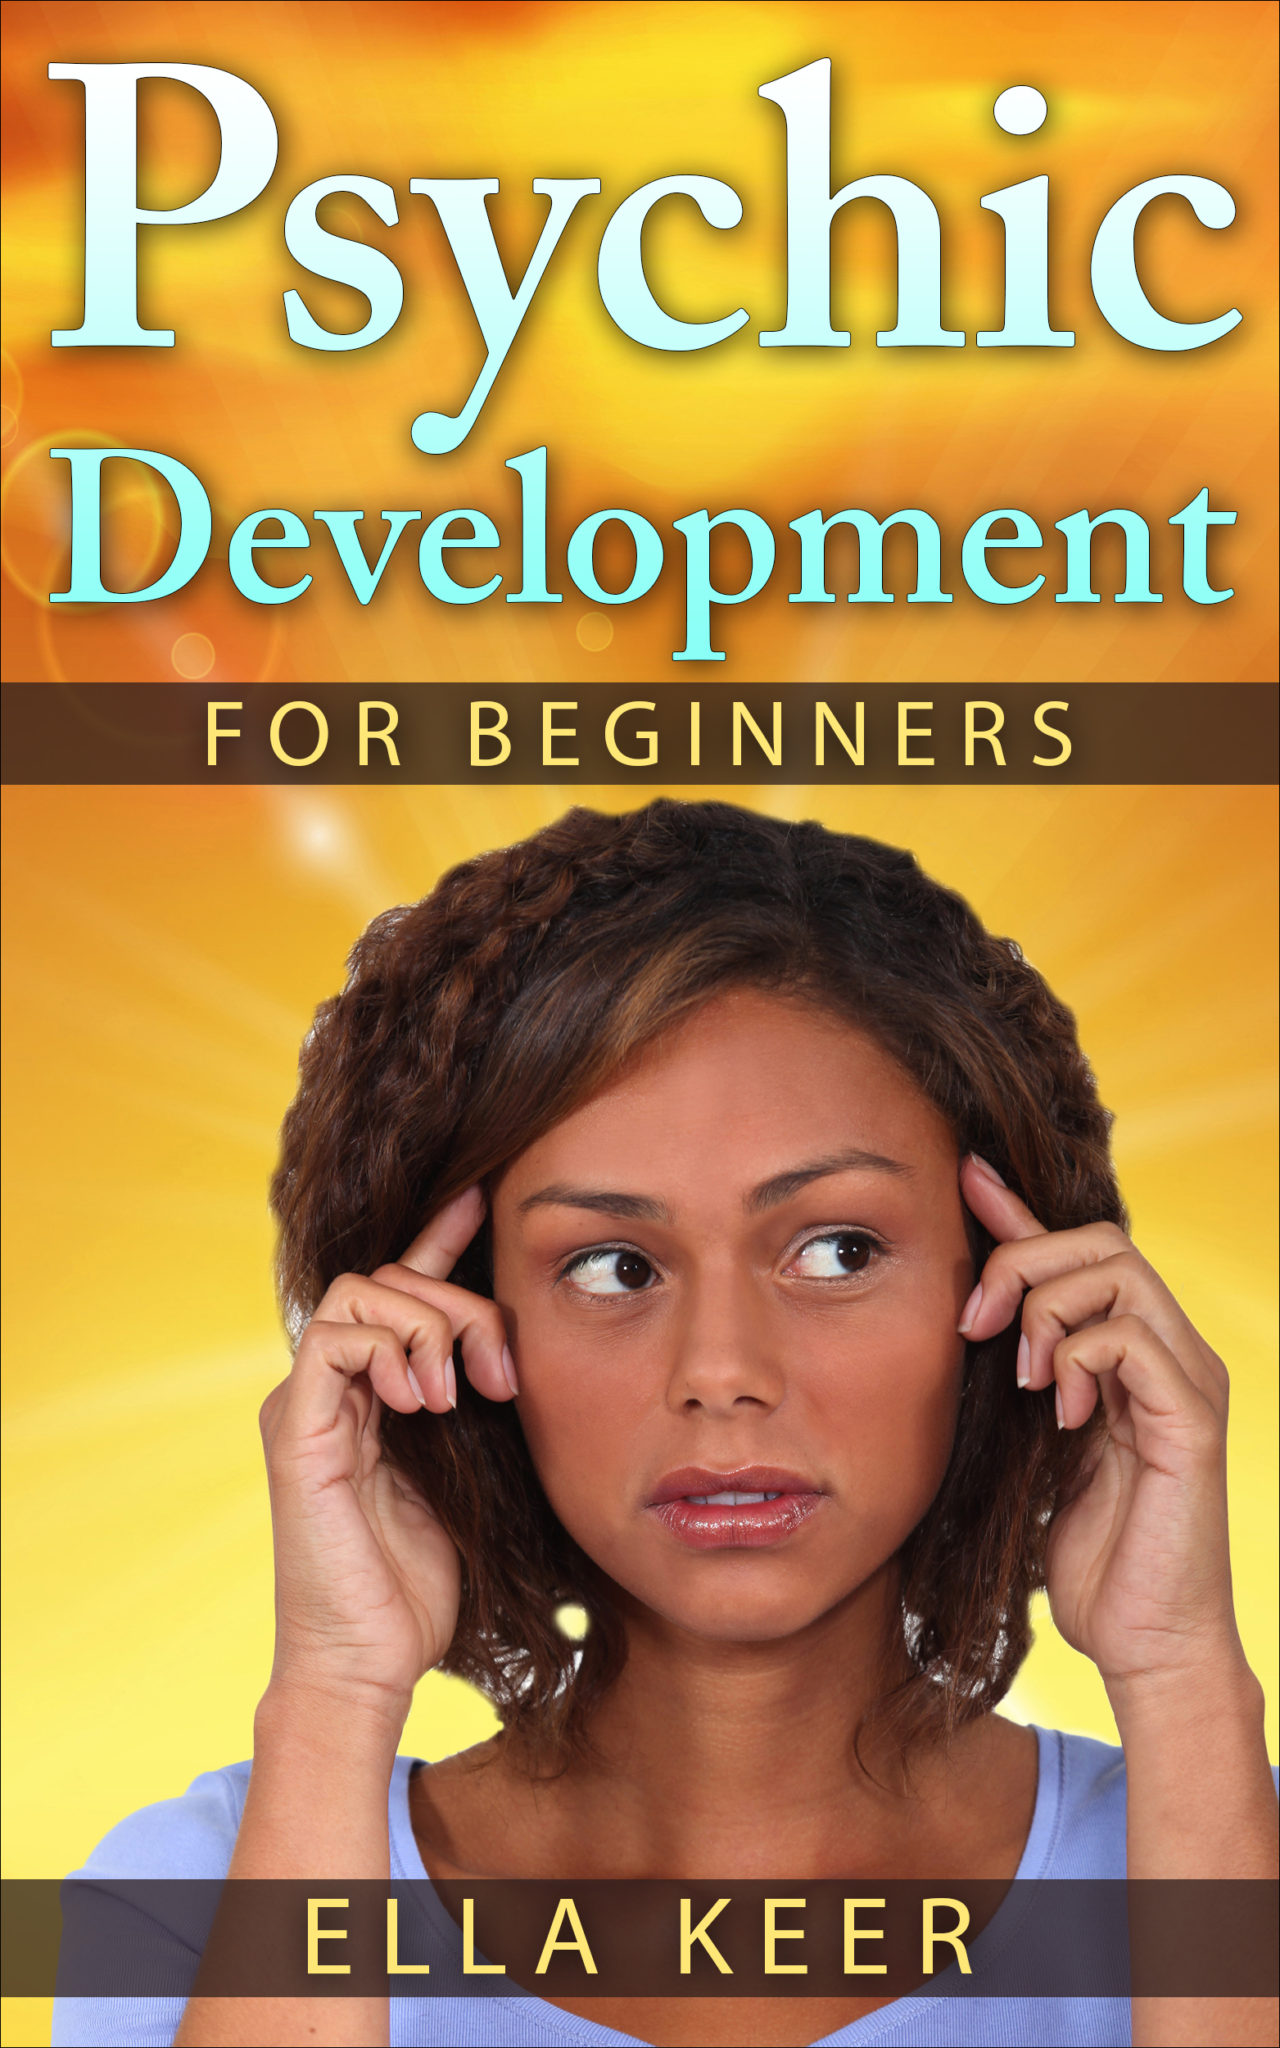 Psychic Development for Beginners: How to Develop Your Inner Psychic Power and Abilities by Ella Keer